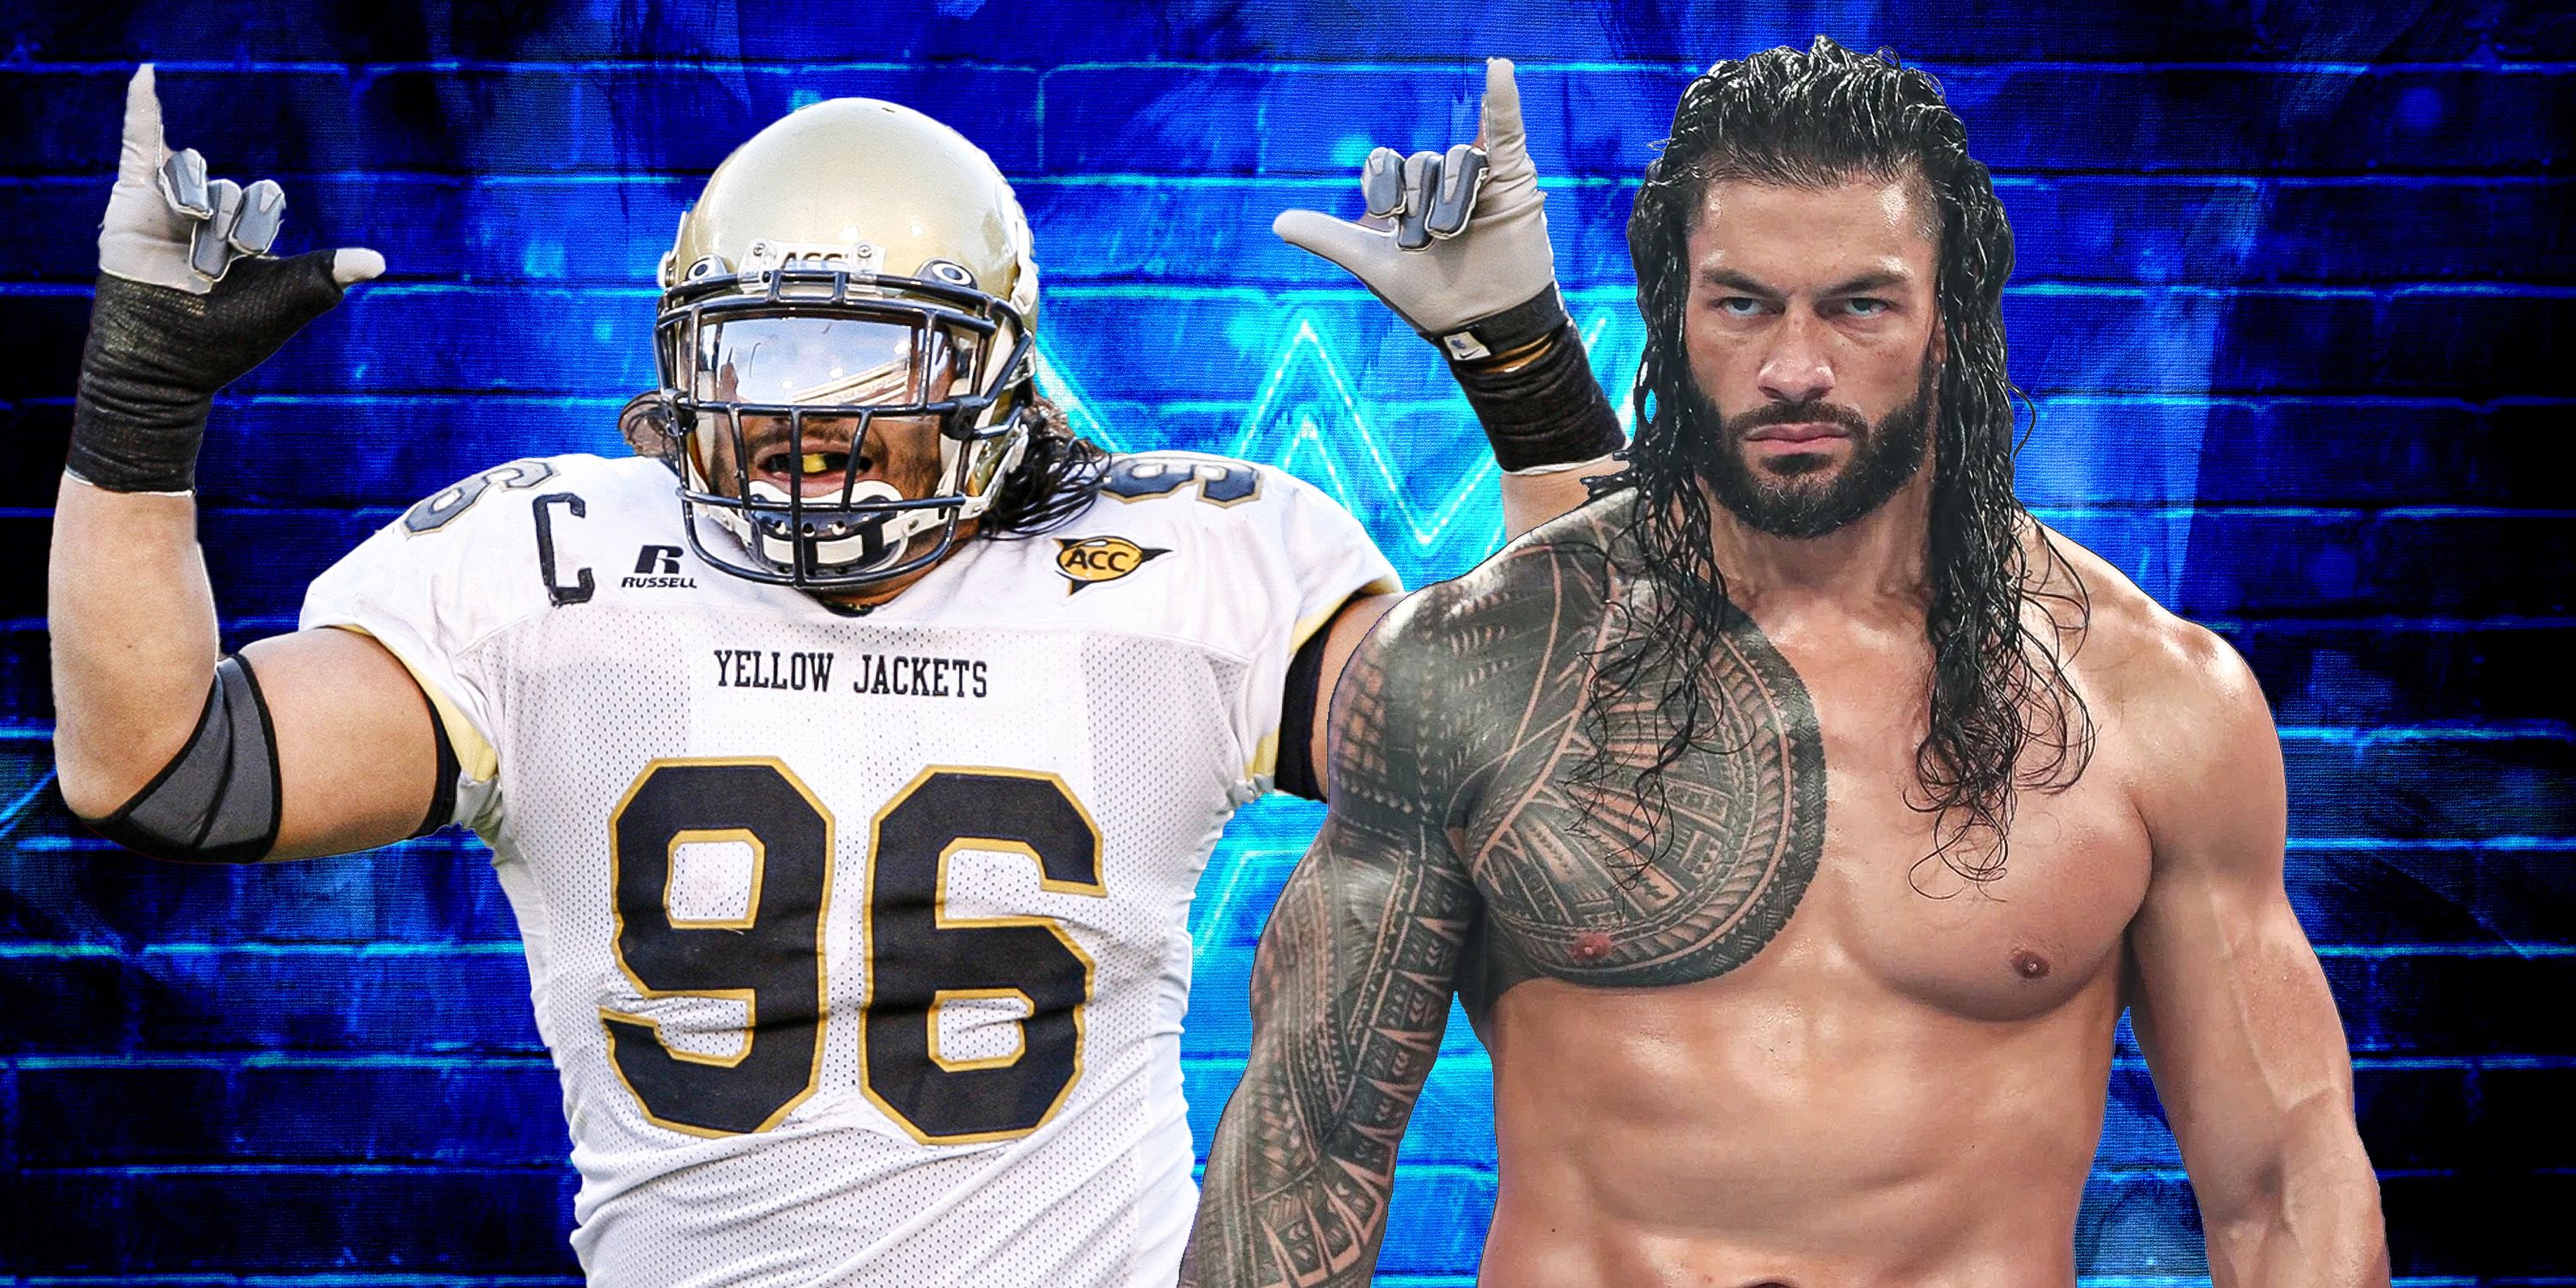 Roman Reigns' transformation from American Footballer to WWE Superstar